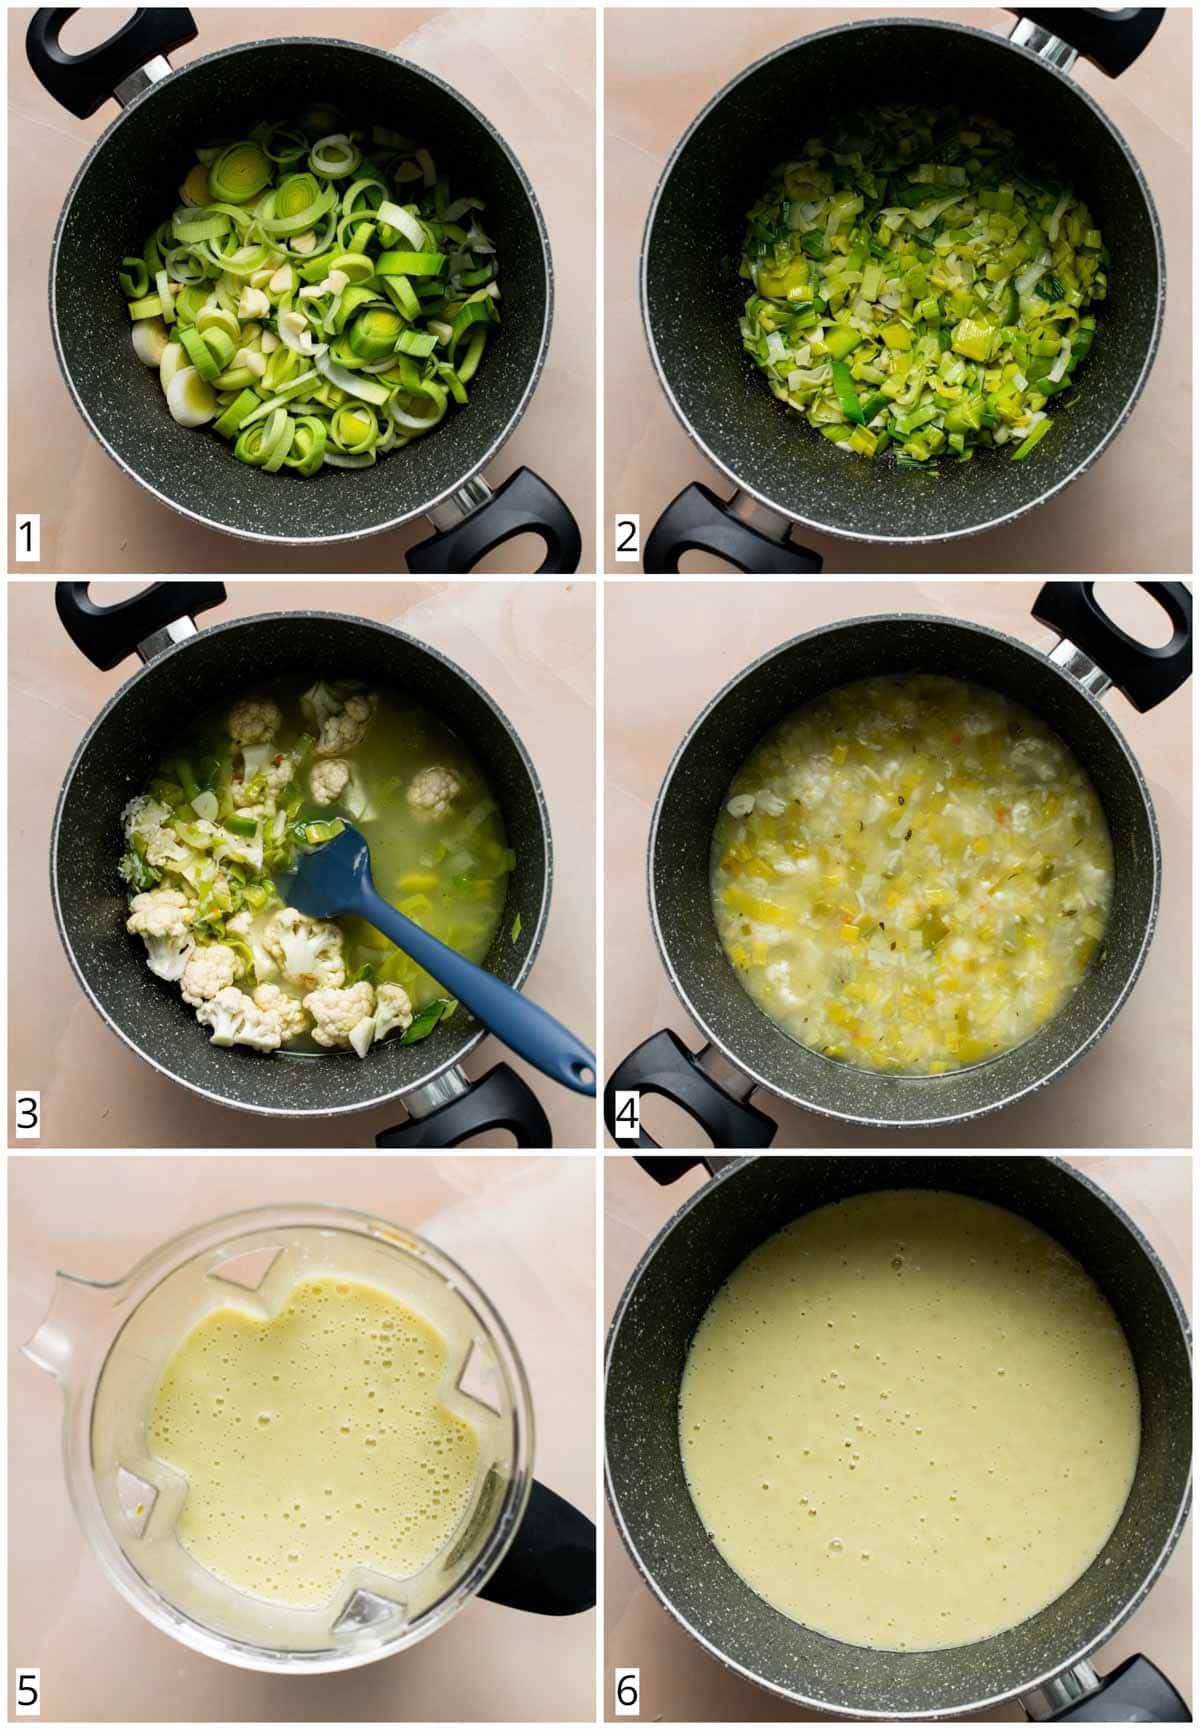 A collage of 6 images showing steps in making no potato leek soup.